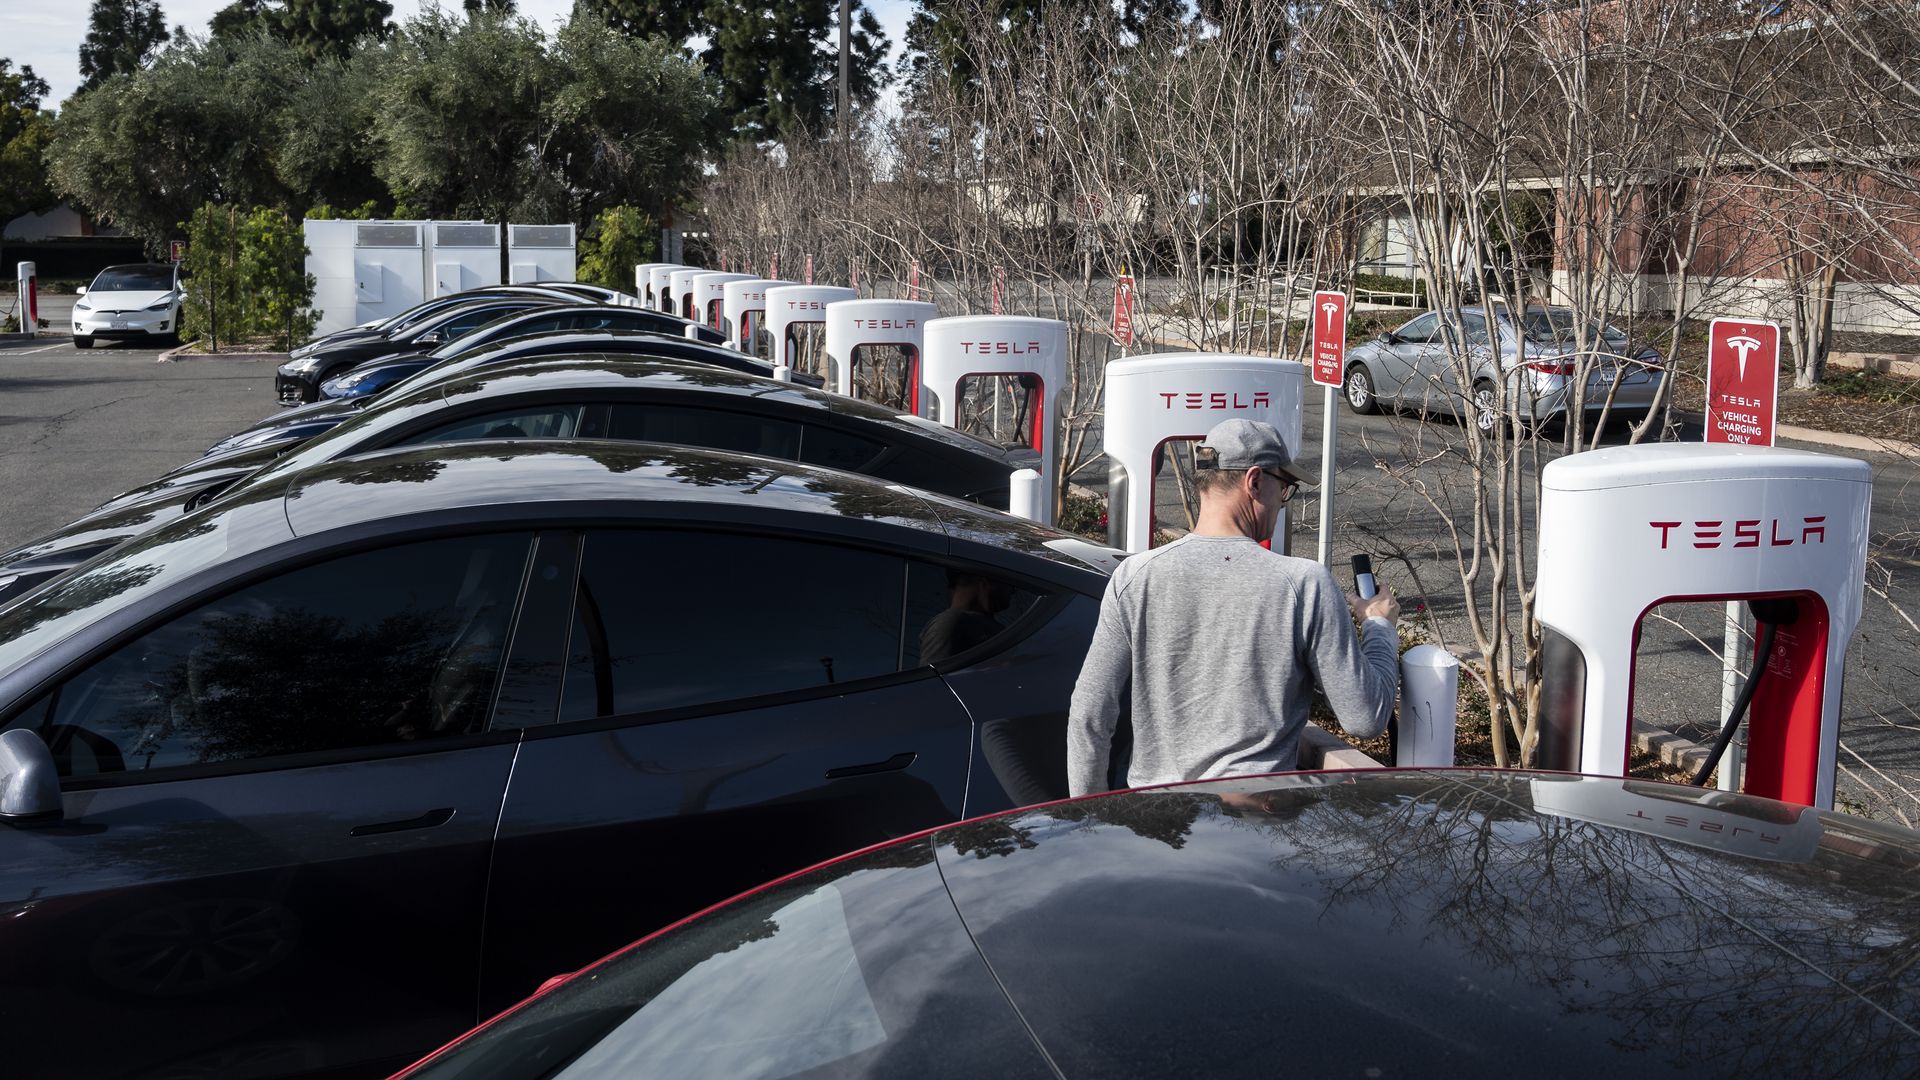 Tesla cars charging at a charging station in Irvine, California, on Jan. 28.